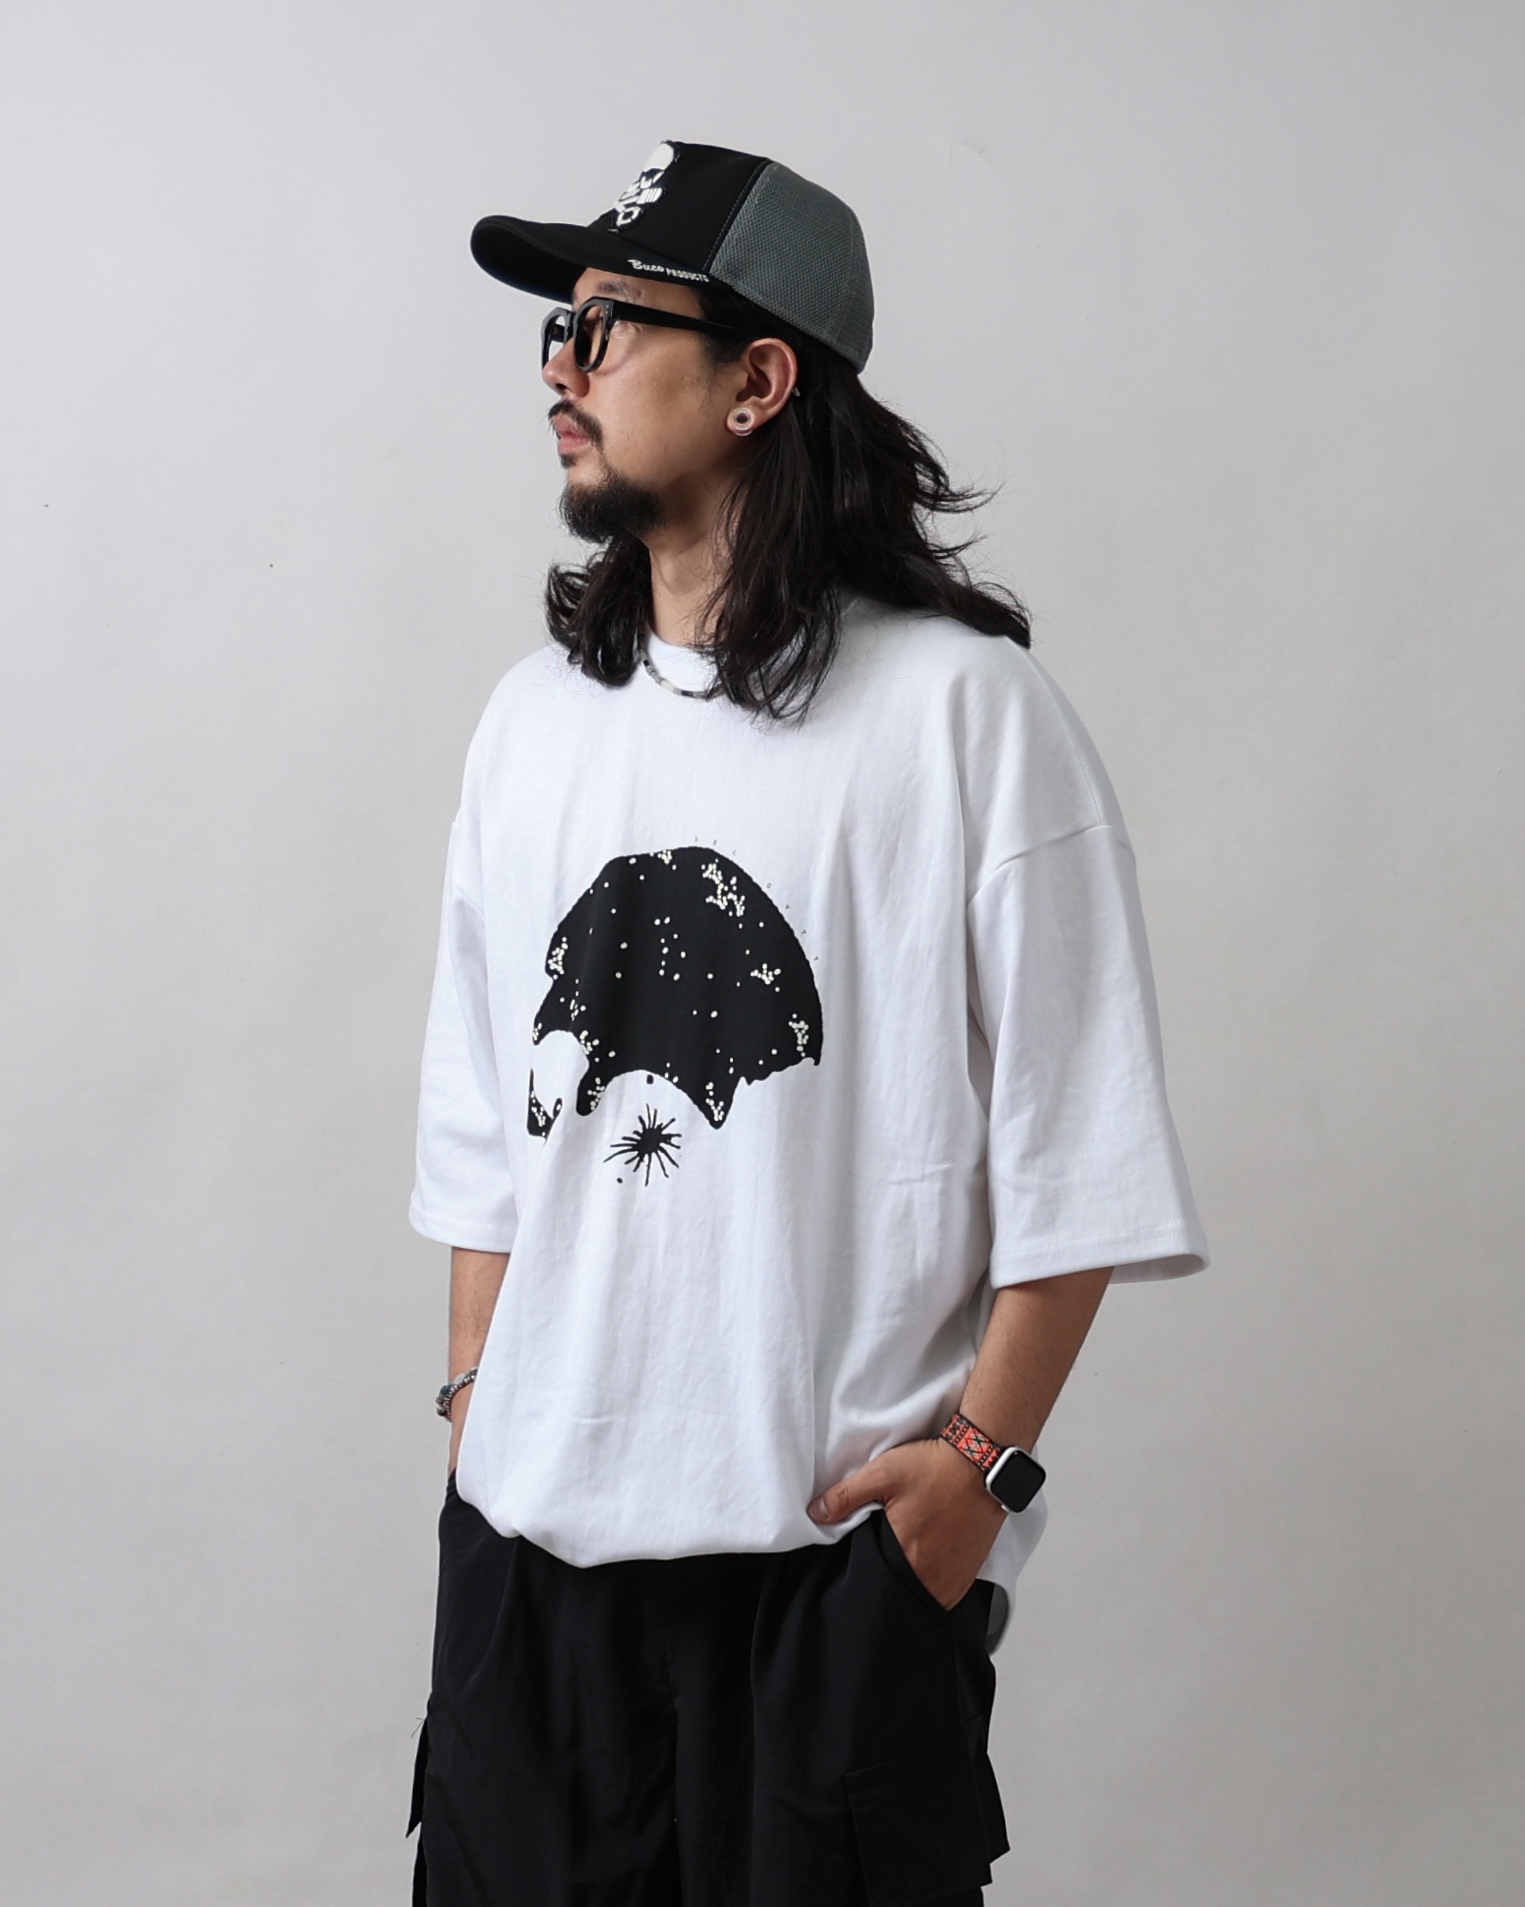 ONOFF Illustrate Skull Over T Shirts (Black/White)